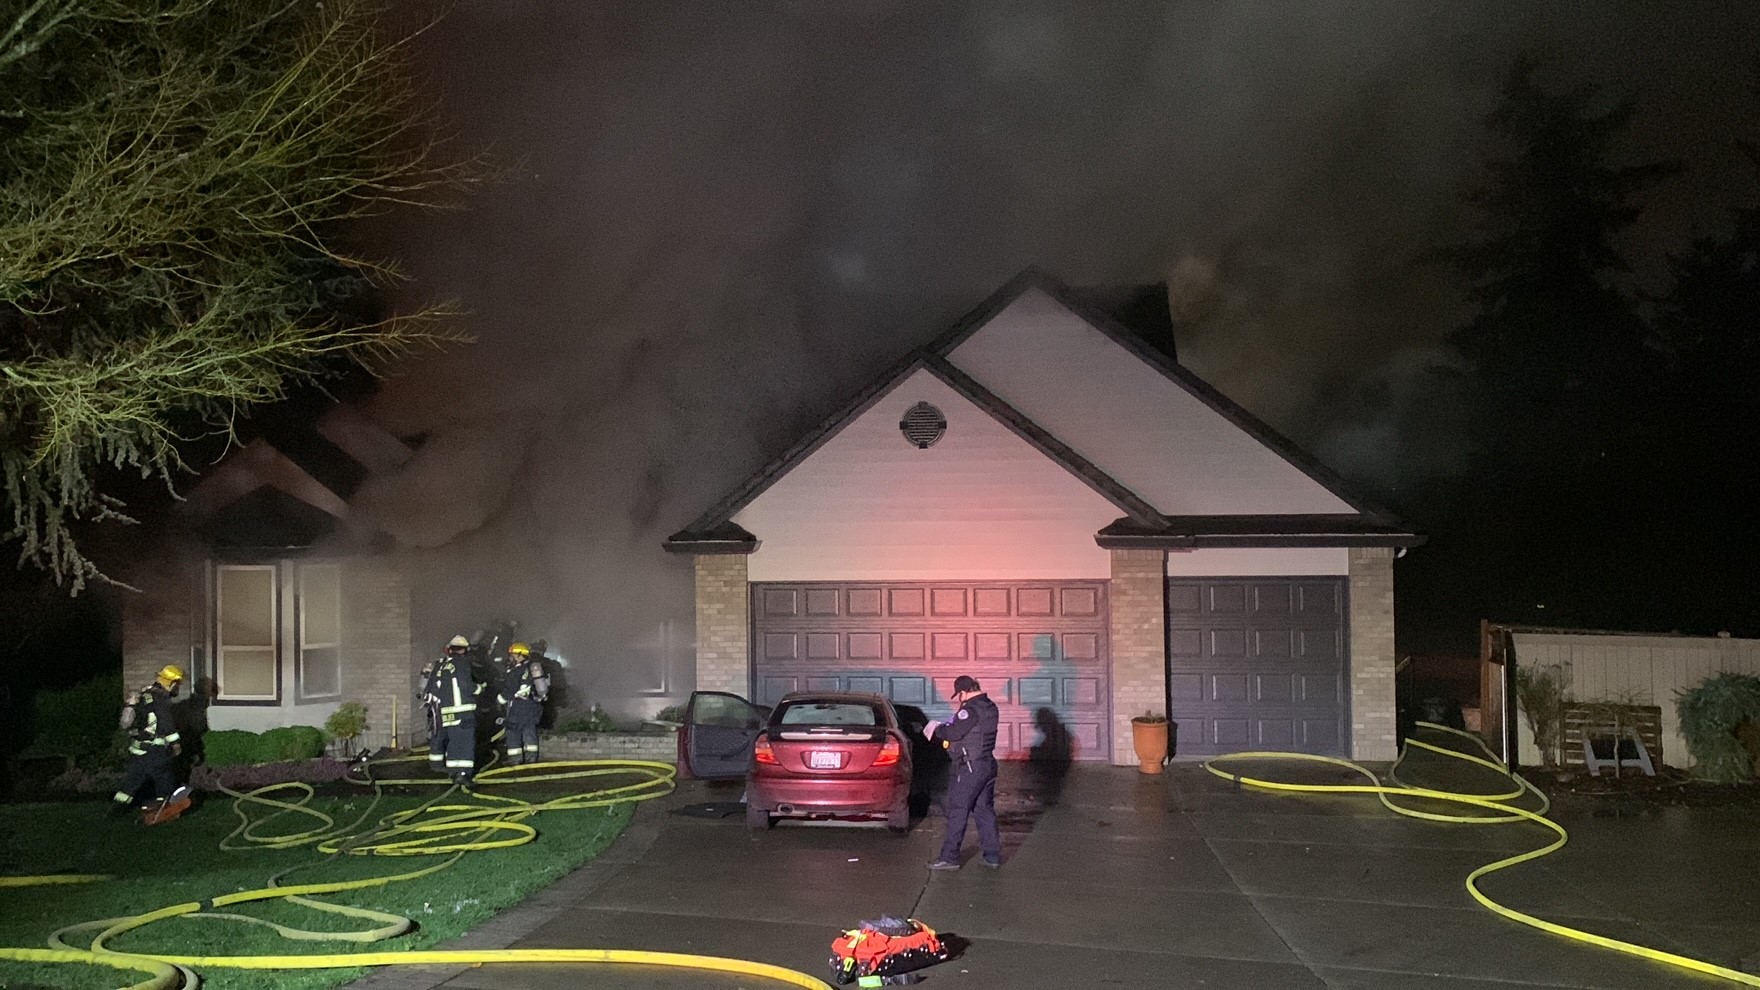 Crews from the Vancouver Fire Department battle a Saturday evening fire at a home in the 14600 block of Southeast 36th Circle in Vancouver's Columbia River neighborhood.